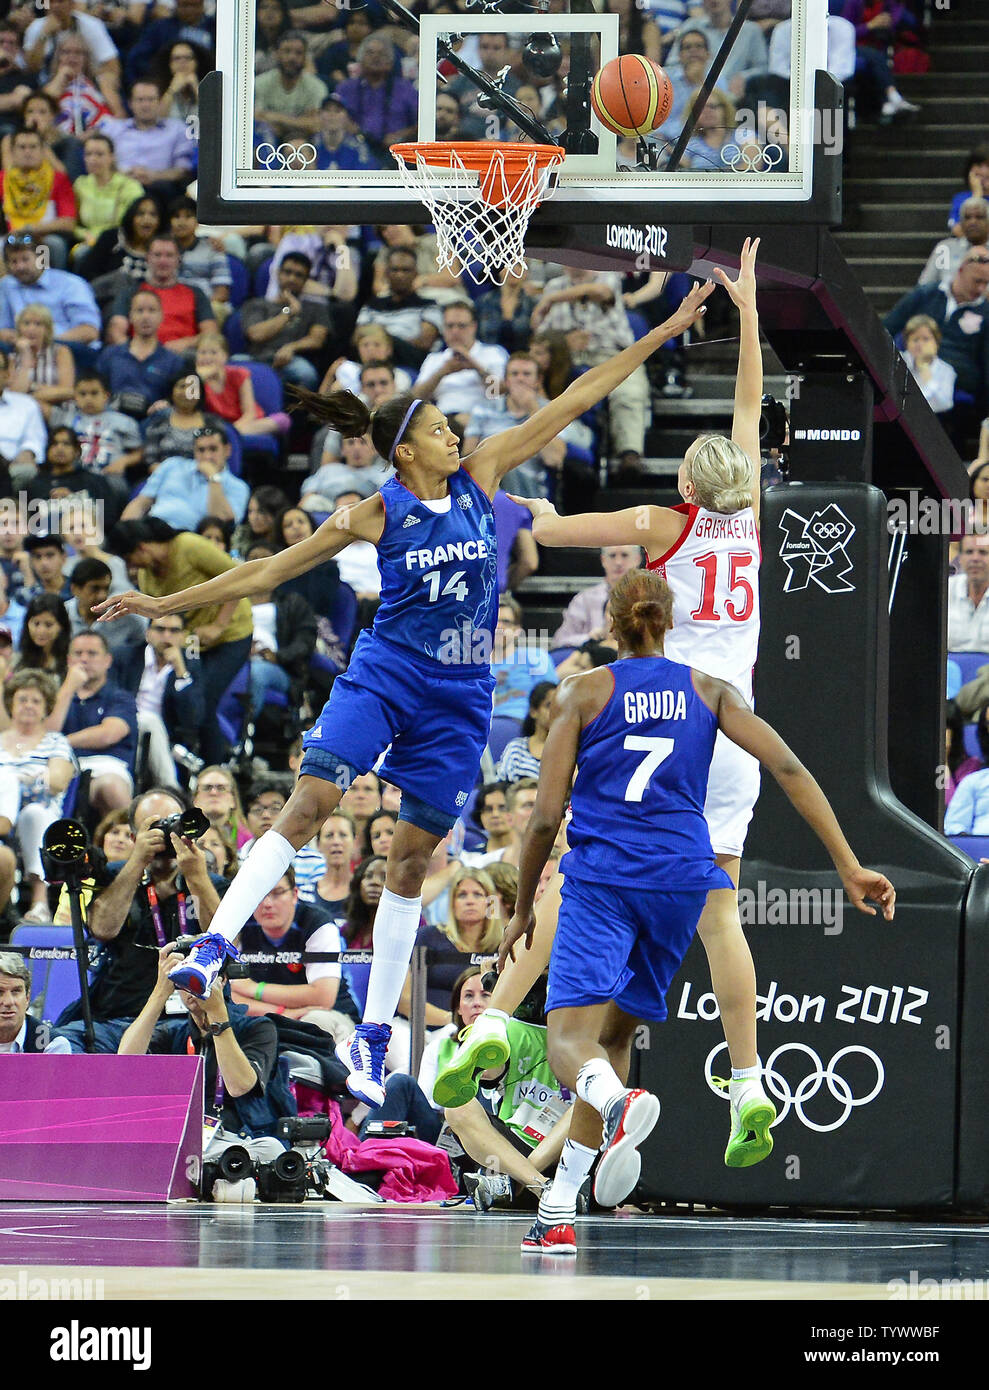 United States' Sue Bird (R) looks to pass the ball as she is defended by  France's Emmeline Ndongue during the USA-France Women's Basketball Gold  Medal Game at the 2012 Summer Olympics, August